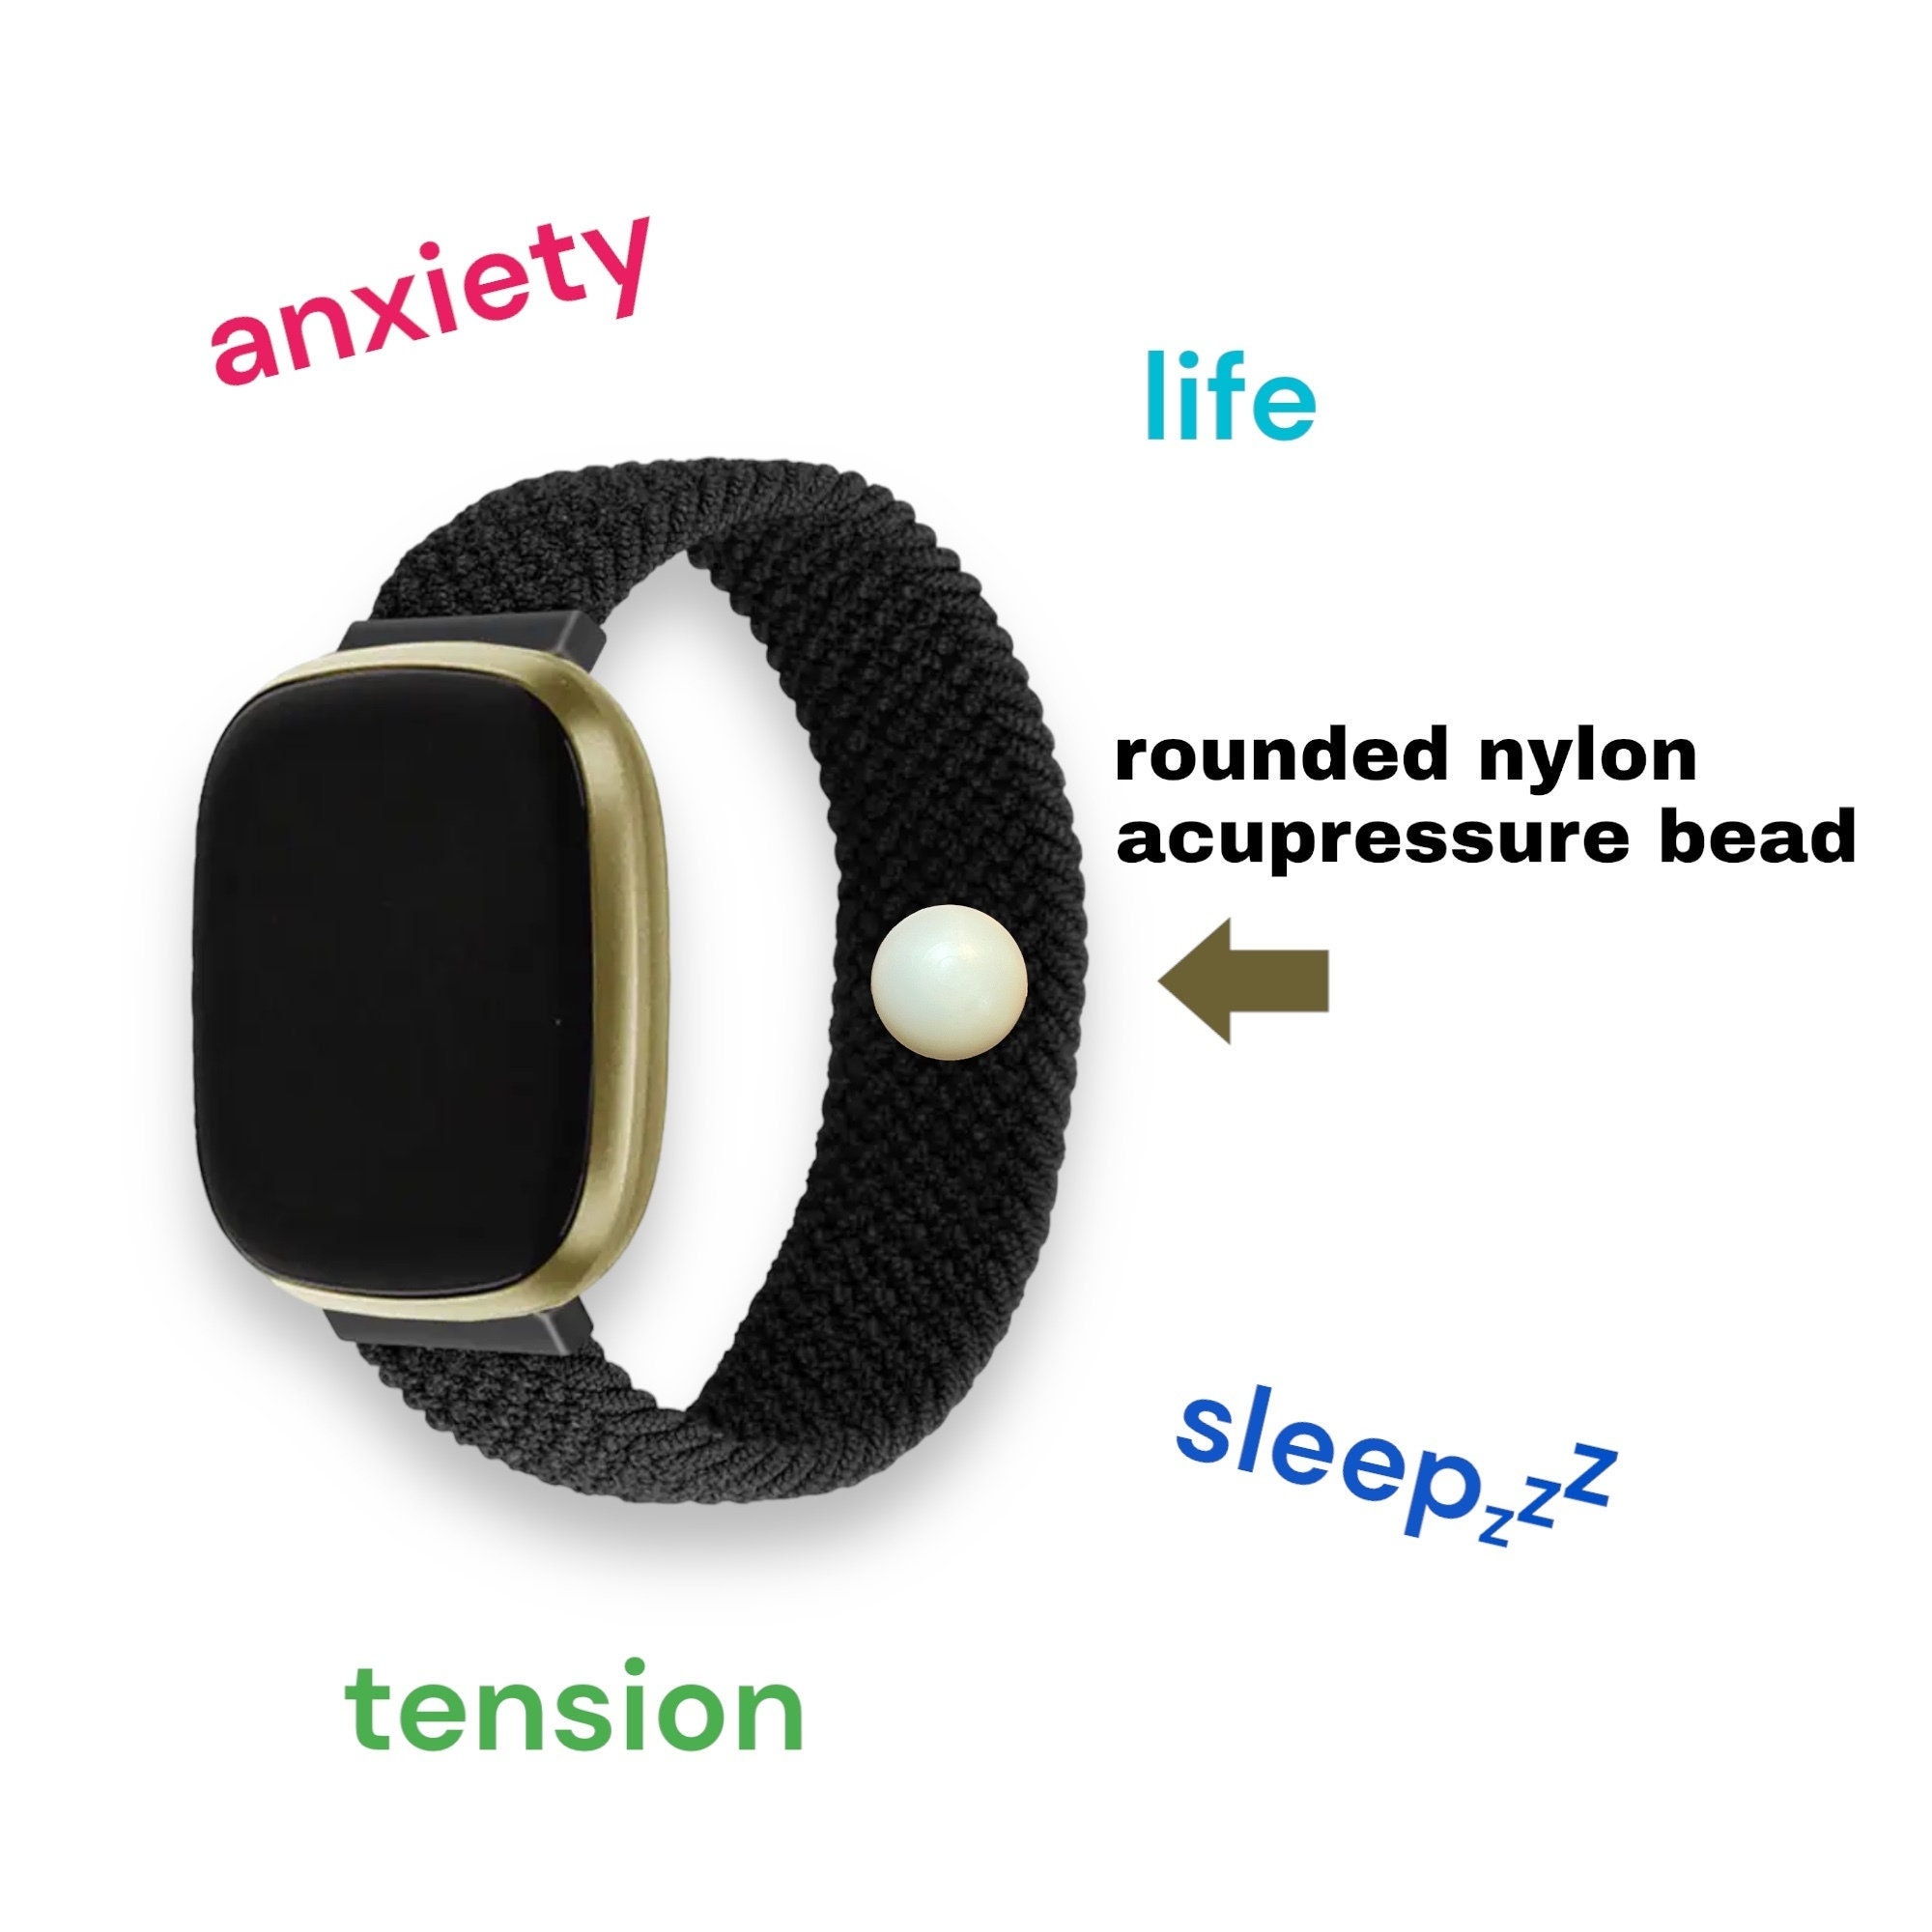 AcuBracelet - Say goodbye to stress and hello to relaxation with our Anti-Anxiety  Bracelet 😌✨ This adjustable acupressure band promotes better sleep and  calms the mind 🌙 #AnxietyRelief #StressFree #SleepBetter #NaturalRemedy  #MentalWellness #